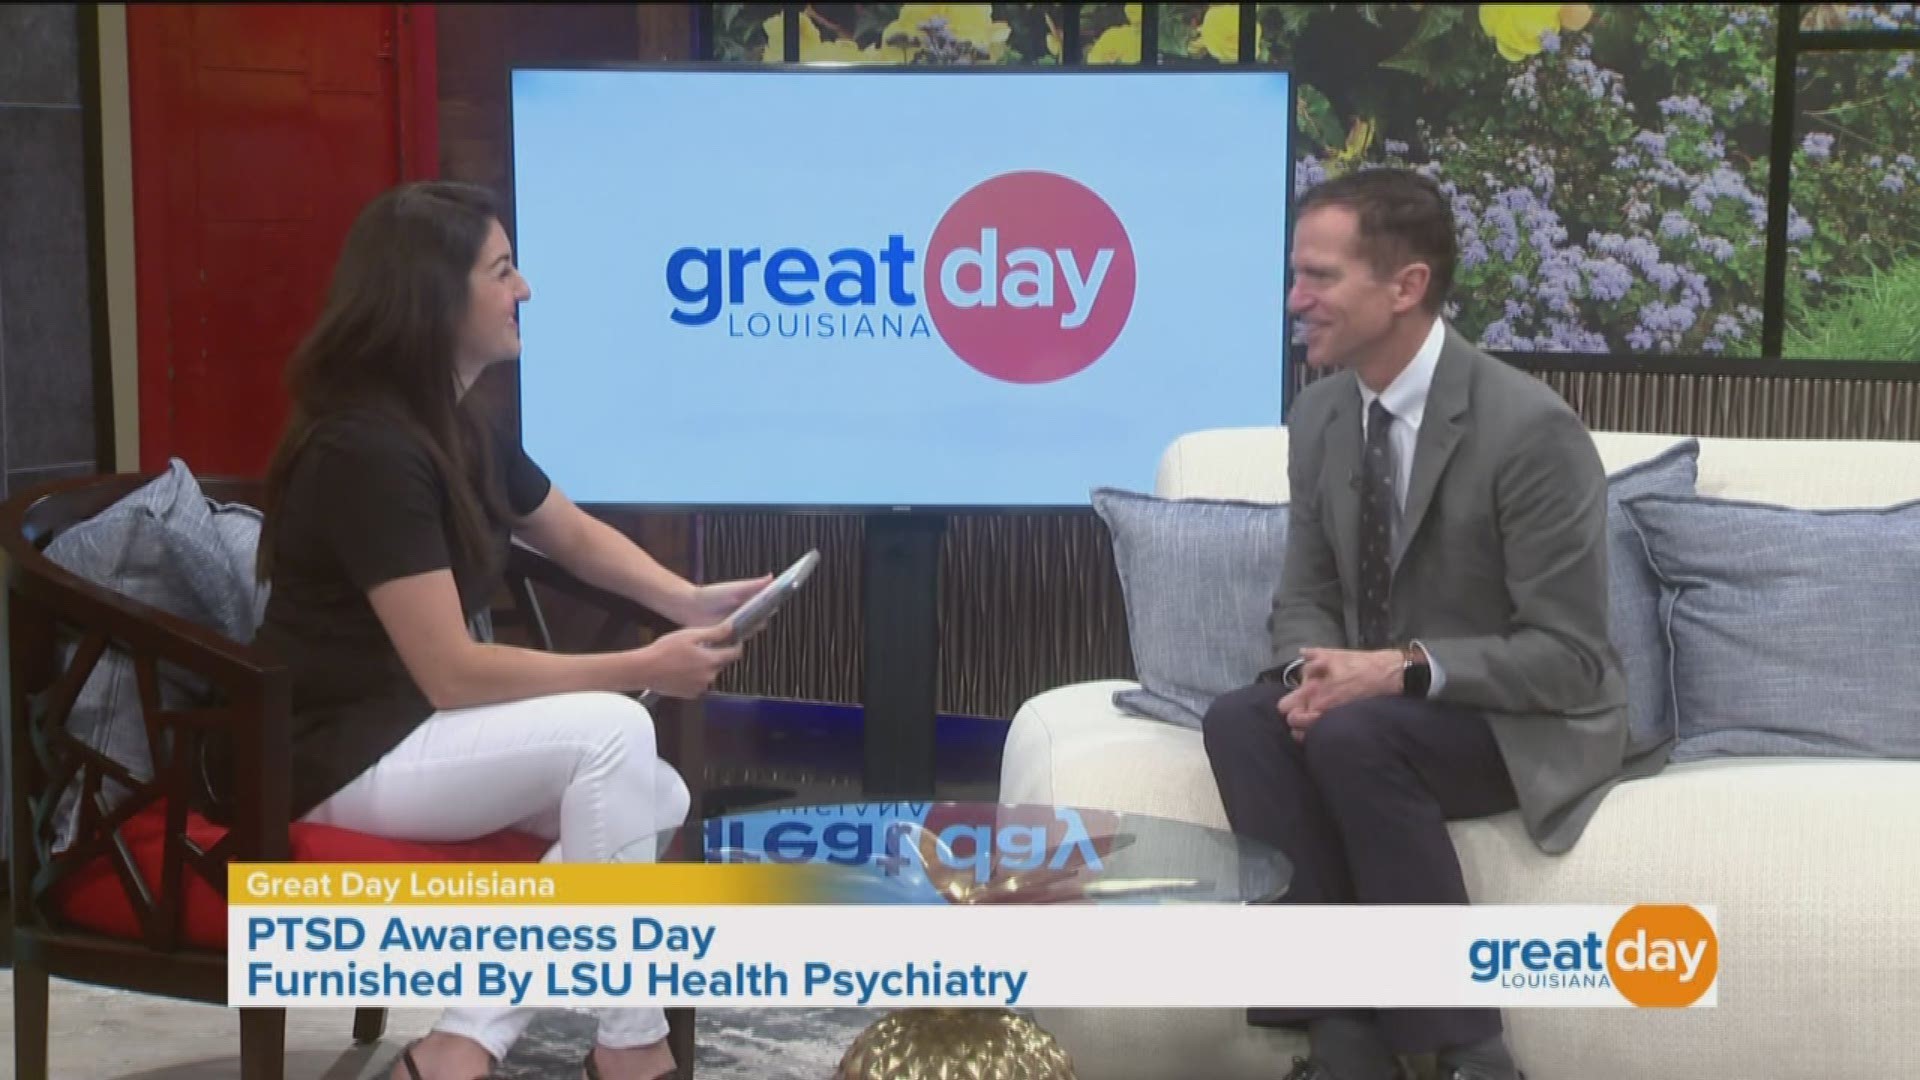 When time passes after a traumatic event, it's natural as time passes to think that your mind and body have healed and moved on, but that isn't always the case. Here to tell us more about PTSD and where you can find resources is LSU Health Psychiatrist Dr. Mark Townsend.